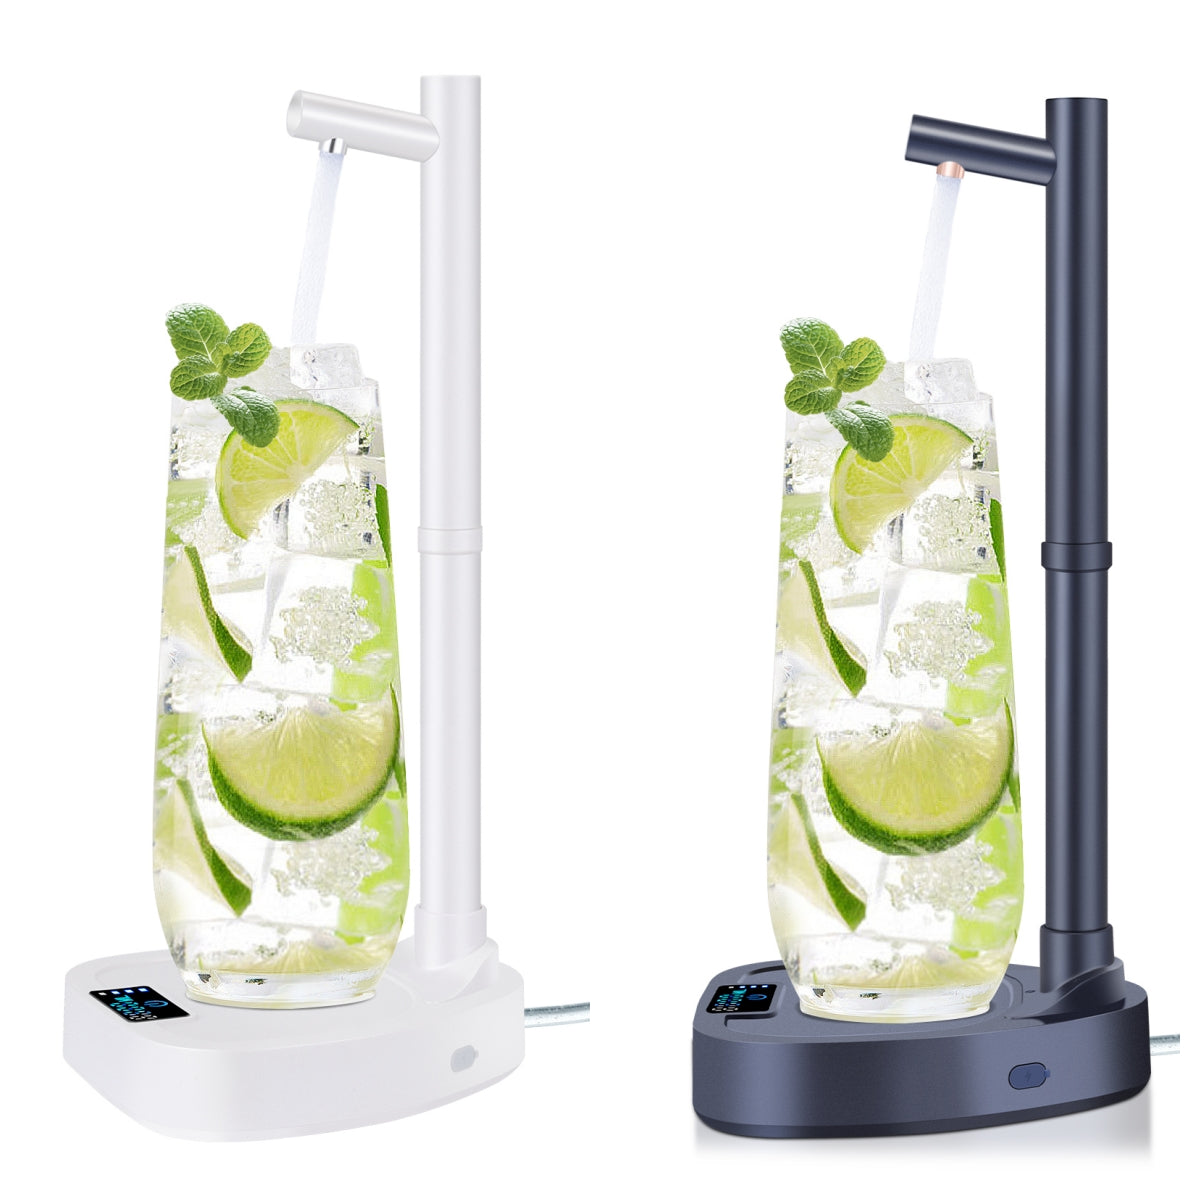 Smart Desktop Water Dispenser - White and Black Variants: The image shows two variants of the Smart Desktop Water Dispenser, one in white and the other in black. Both dispensers are shown pouring water into glasses filled with ice and lime, highlighting their sleek, modern design.